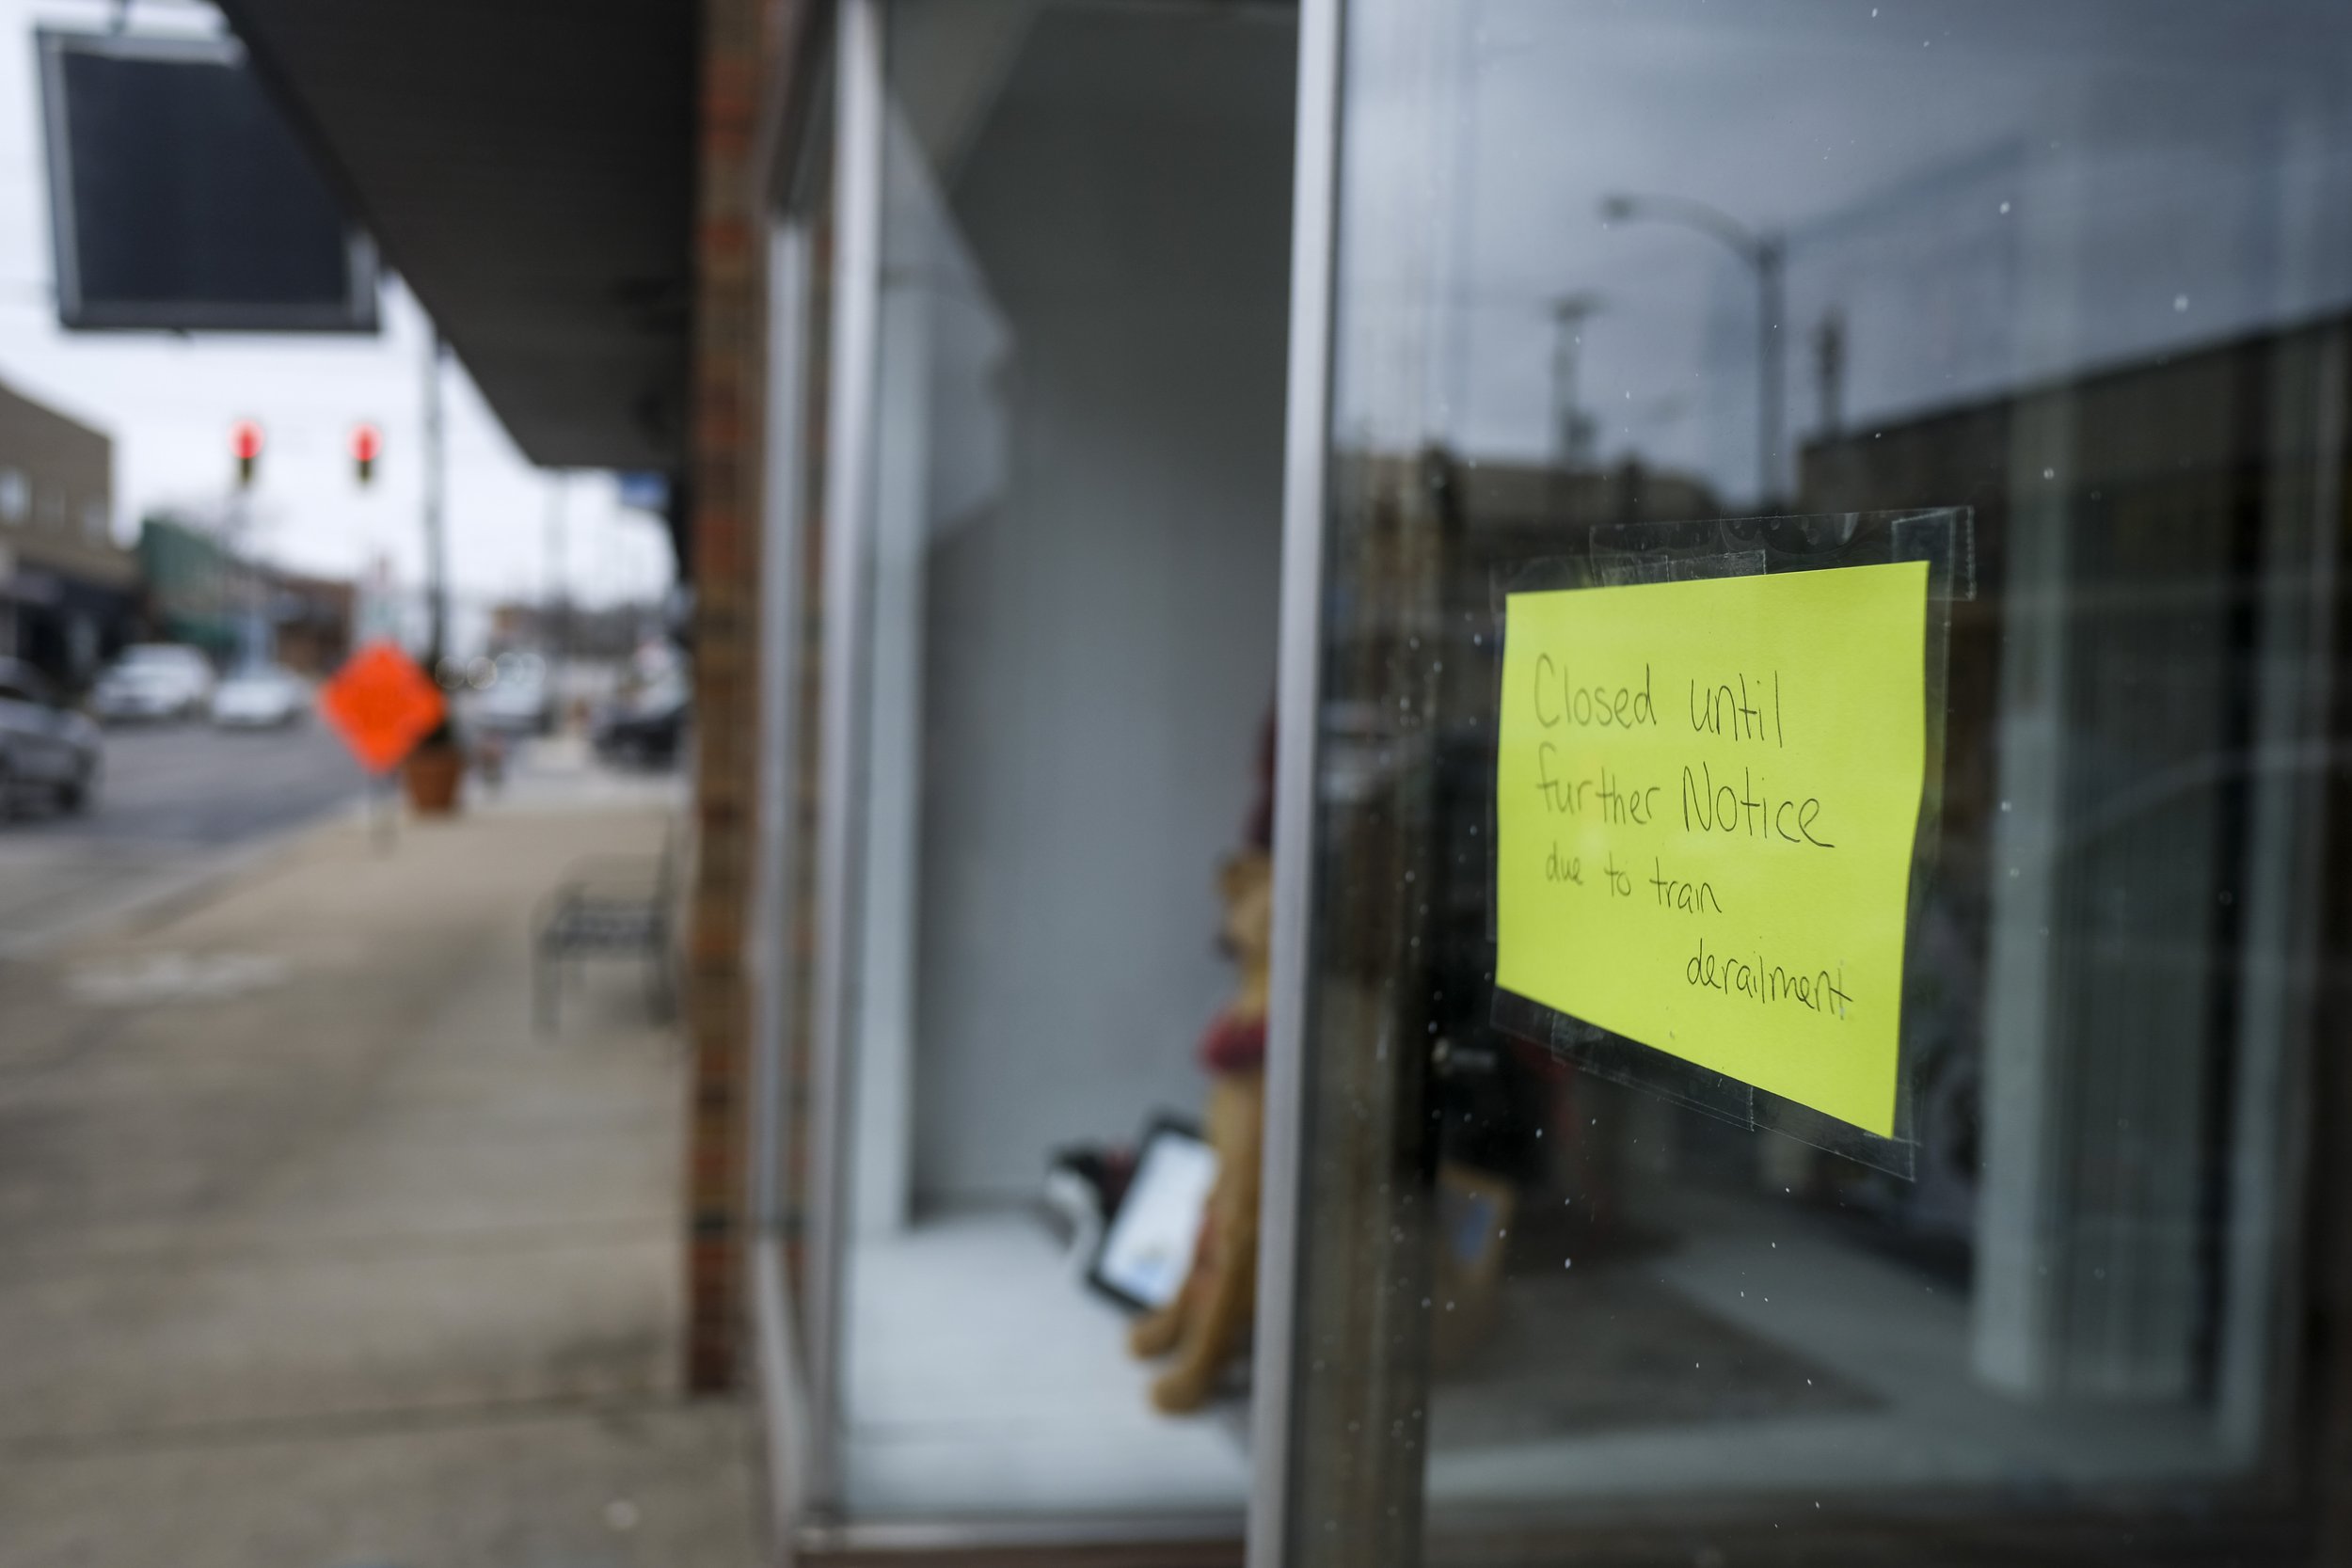  A note stating the closure of a shop on North Mark Street in East Palestine, Ohio on Friday, February 17, 2023. On February 3 a Norfolk Southern train derailed while carrying several cars containing toxic materials including Vinyl Phosphate. Followi